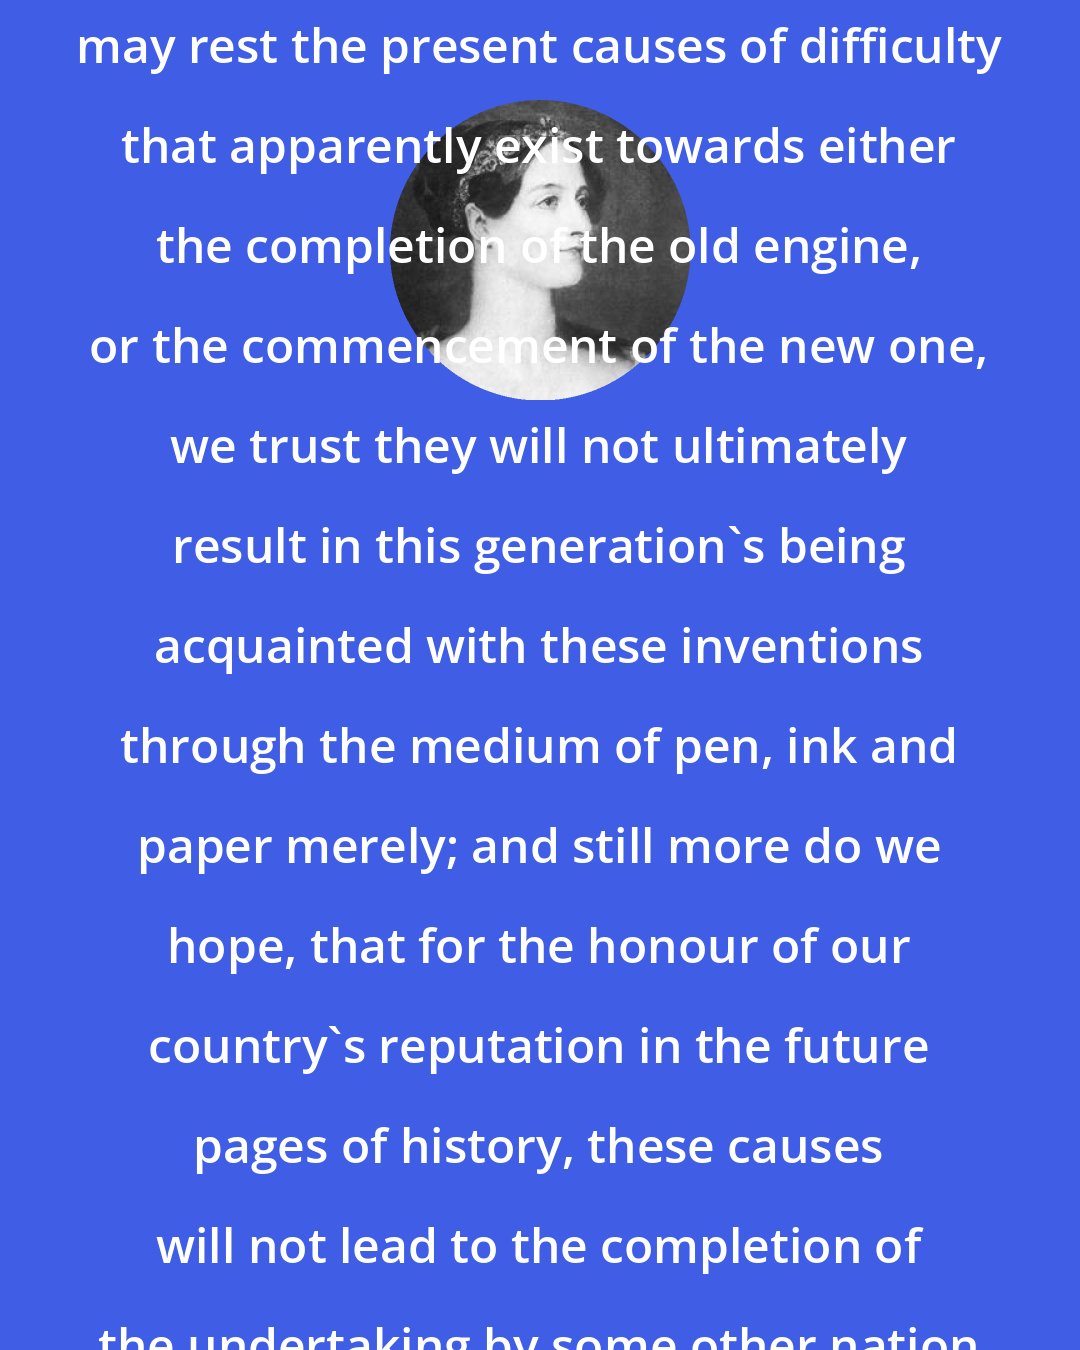 Ada Lovelace: With whomsoever or wheresoever may rest the present causes of difficulty that apparently exist towards either the completion of the old engine, or the commencement of the new one, we trust they will not ultimately result in this generation's being acquainted with these inventions through the medium of pen, ink and paper merely; and still more do we hope, that for the honour of our country's reputation in the future pages of history, these causes will not lead to the completion of the undertaking by some other nation or government.